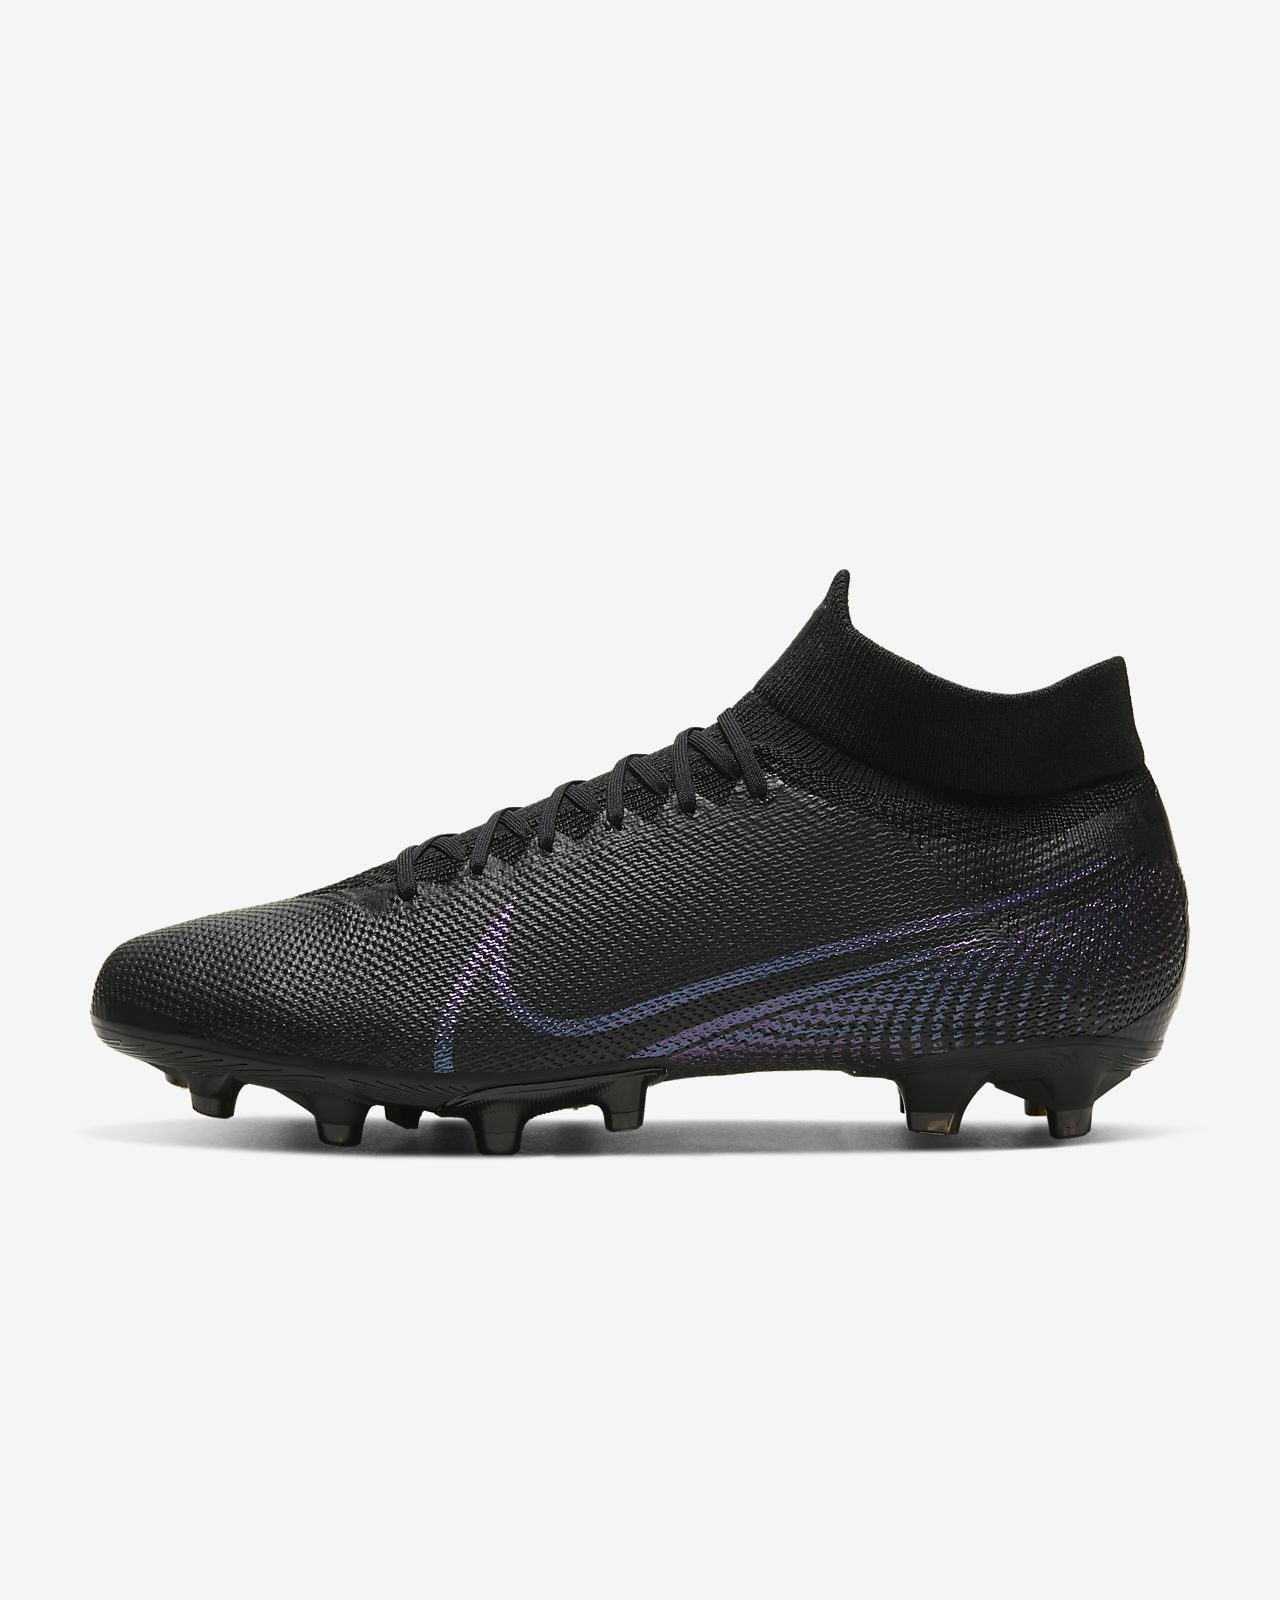 Nike Mercurial Superfly 7 Pro AG PRO Artificial Grass Football Boot.